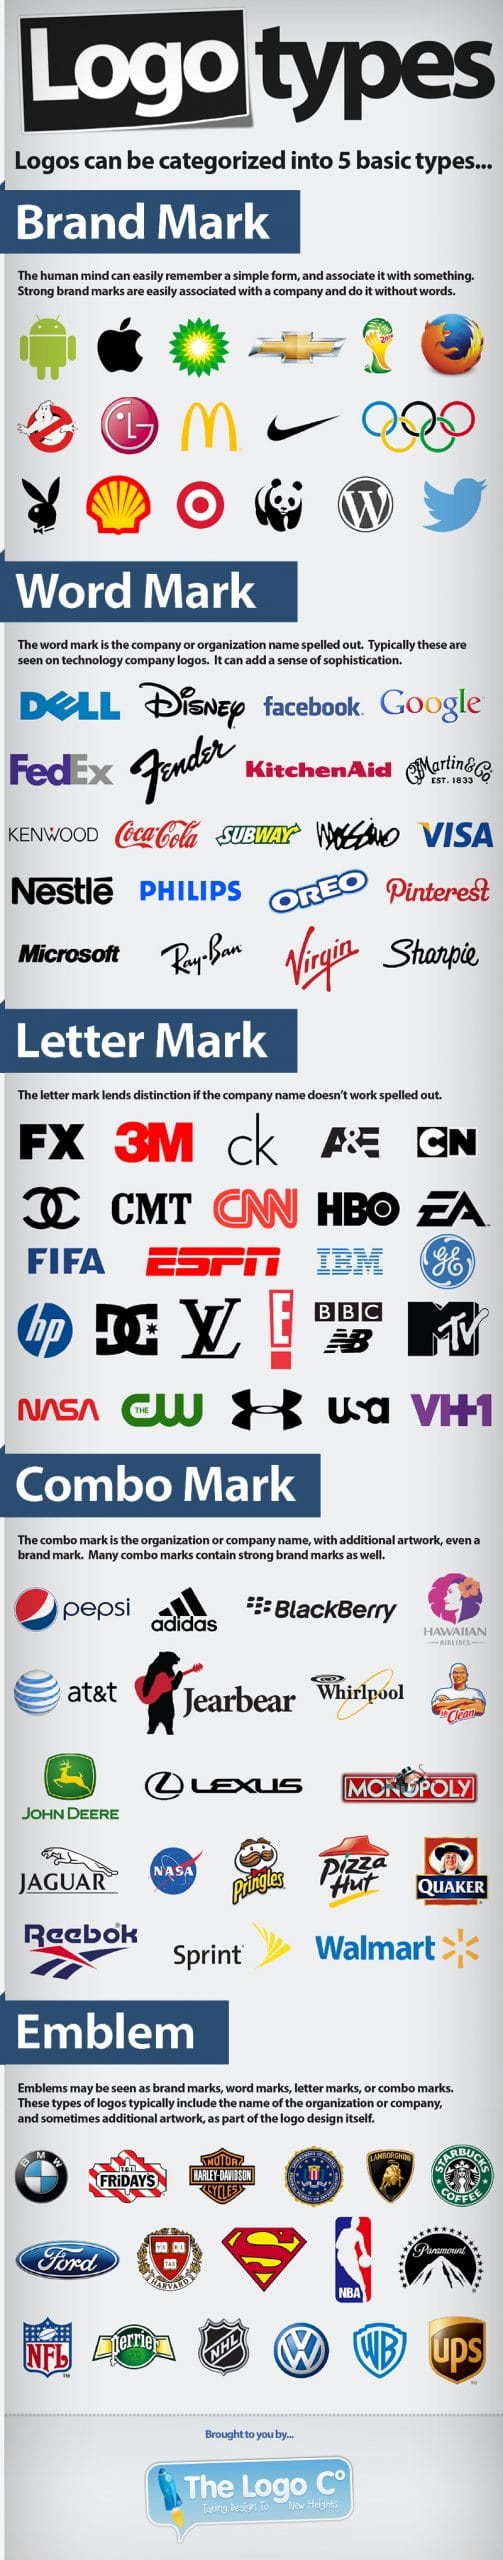 The 5 logo styles are easy to see on this guide an infographic by The Logo Company. Brand mark, Word mark, letter mark, combo mark and emblem